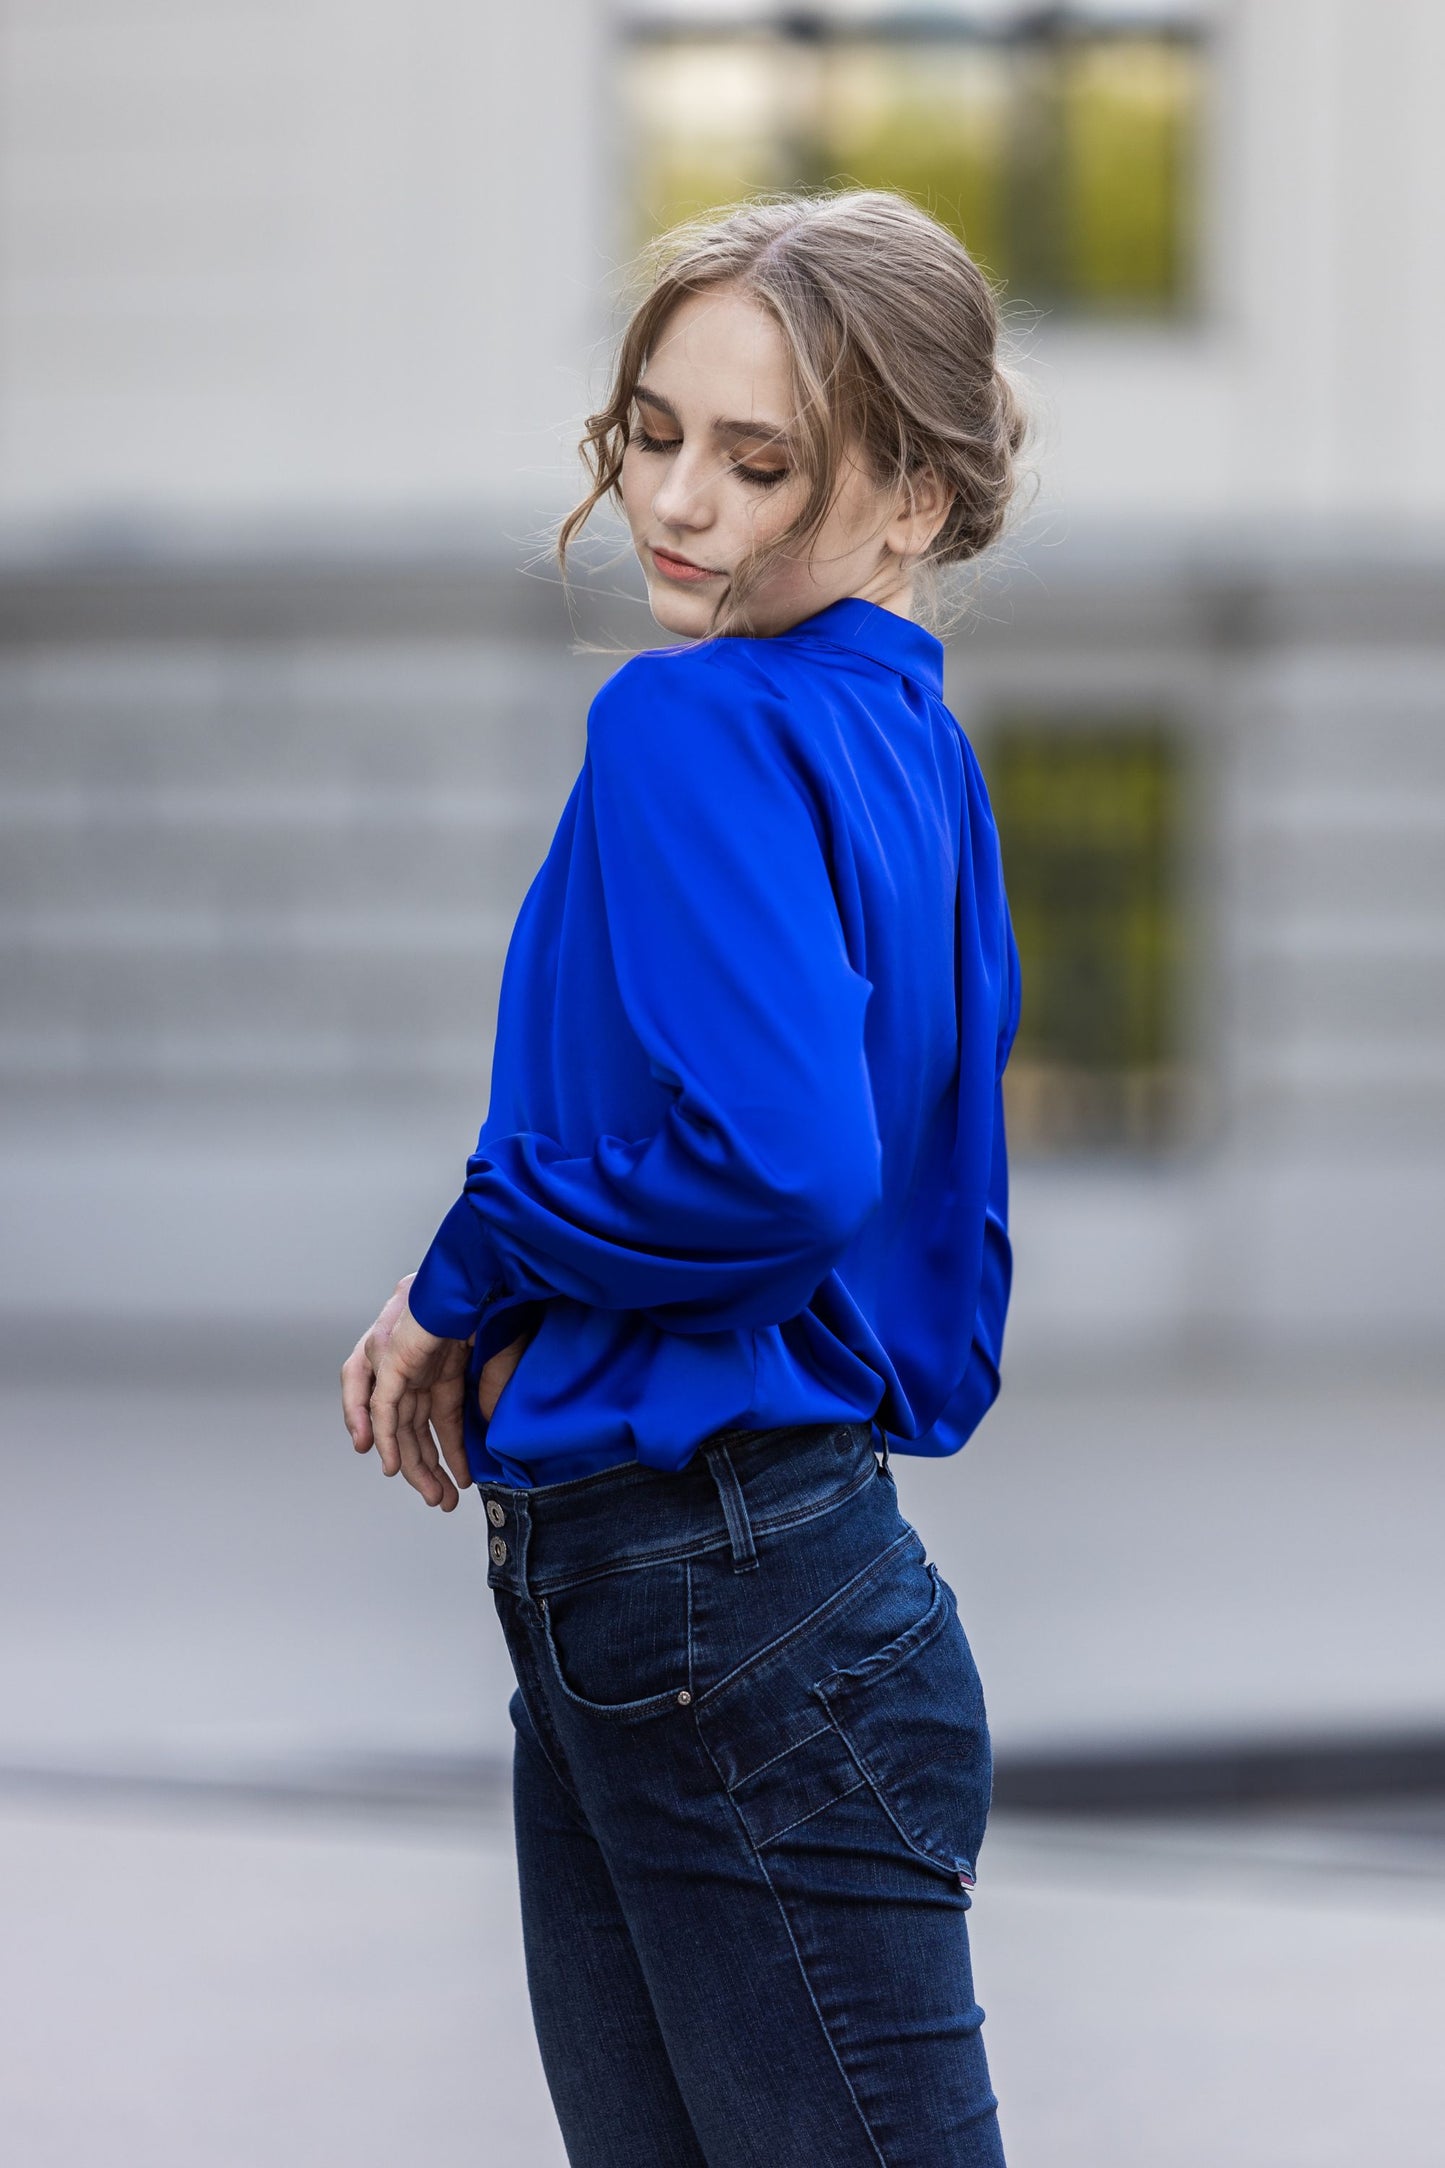 Bright blue satin blouse with V cut